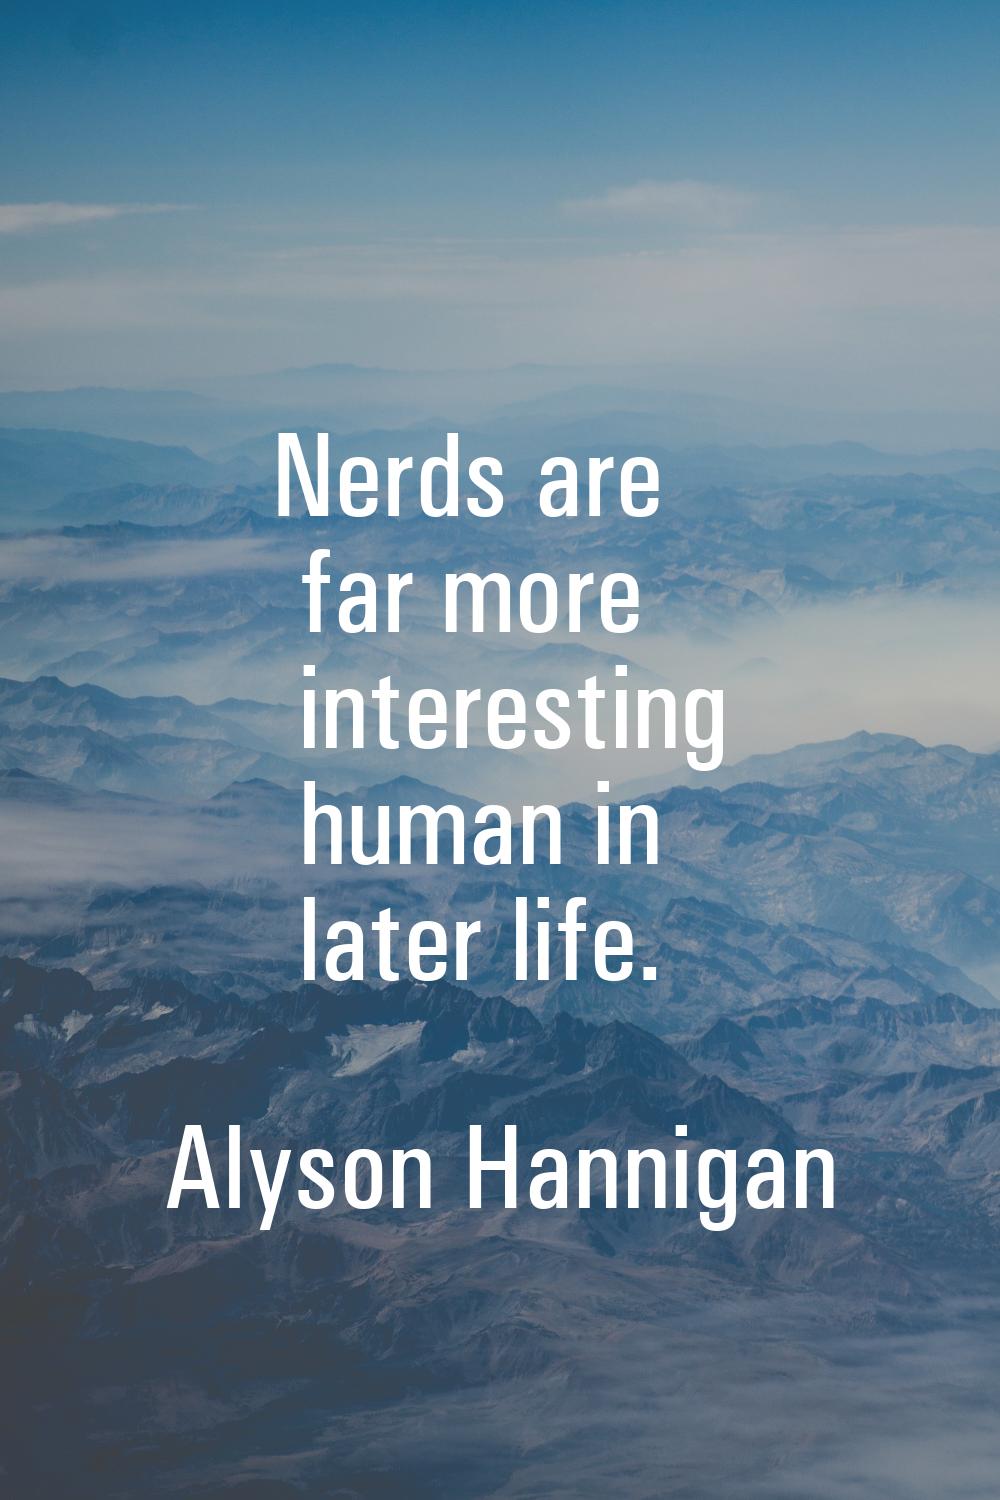 Nerds are far more interesting human in later life.